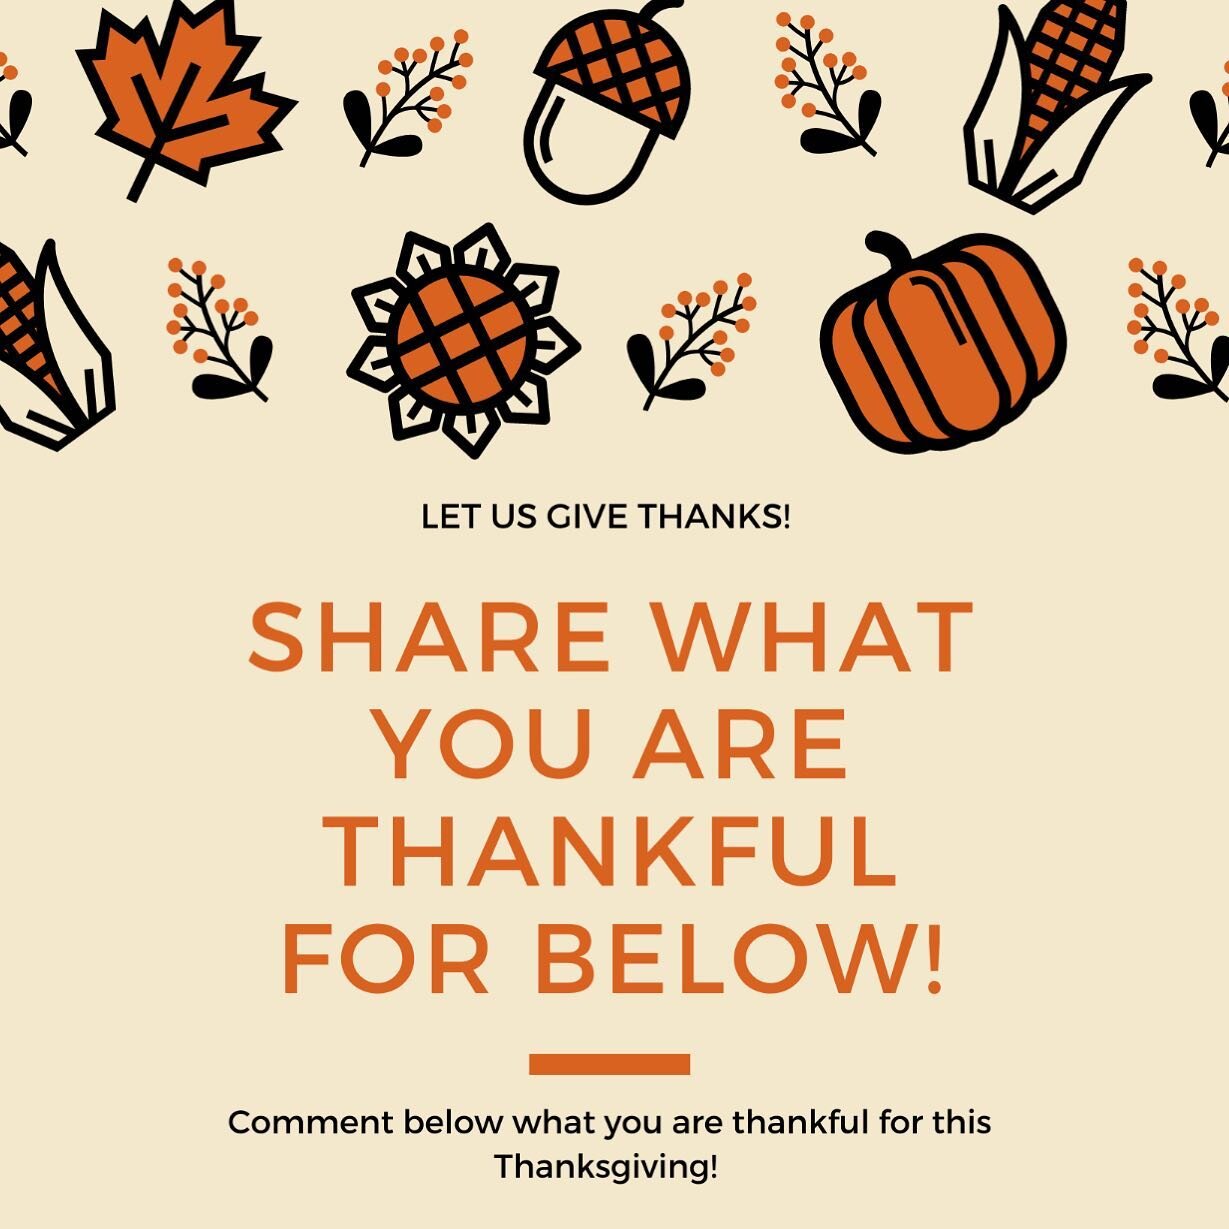 What are you thankful for this year? We are thankful for all of our amazing staff members, and all that they do for our center!